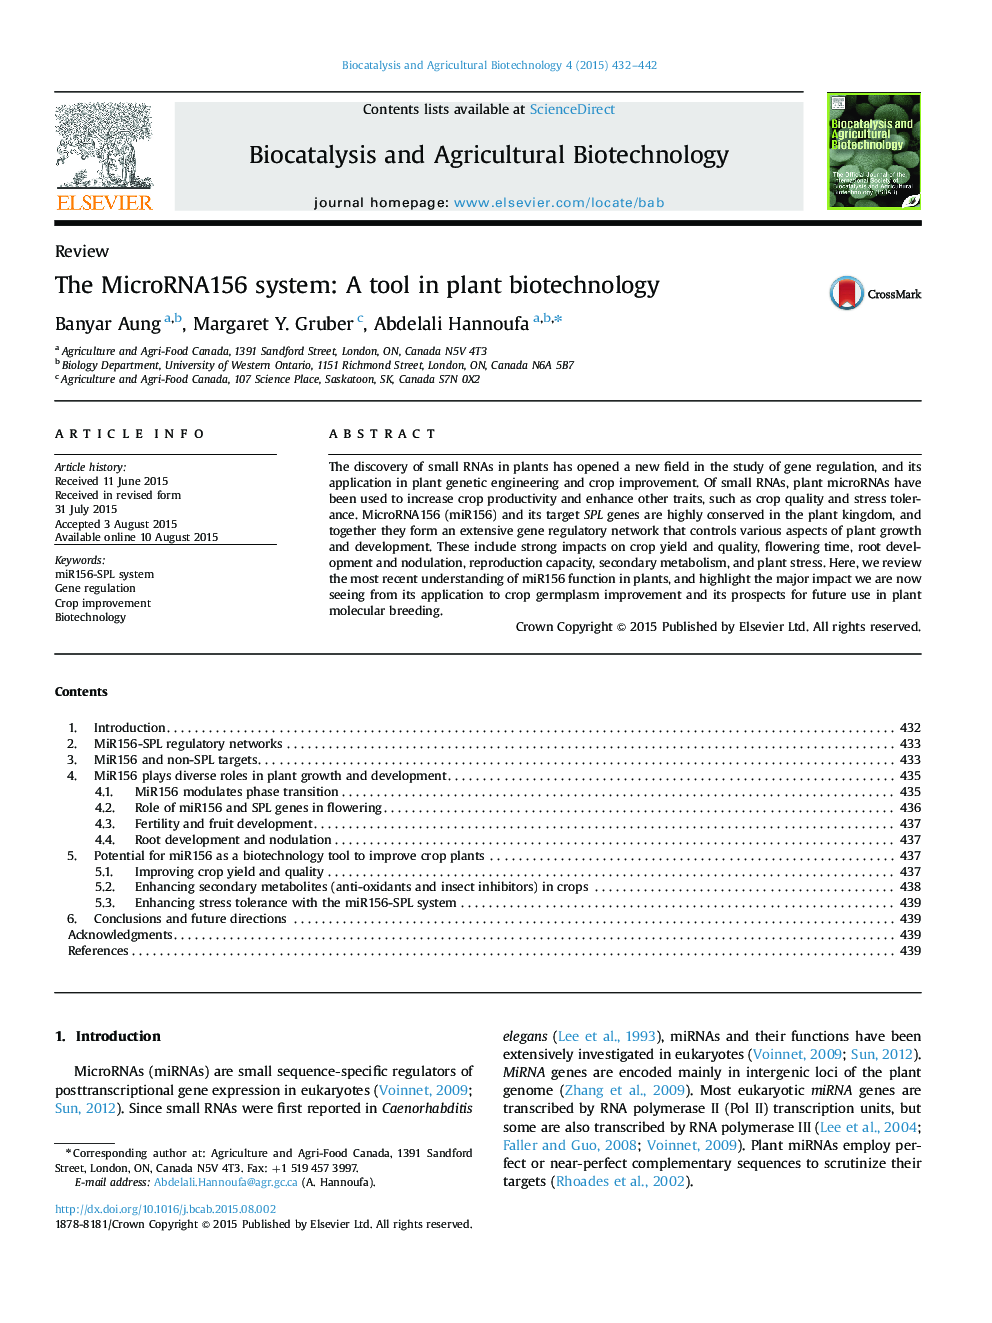 The MicroRNA156 system: A tool in plant biotechnology